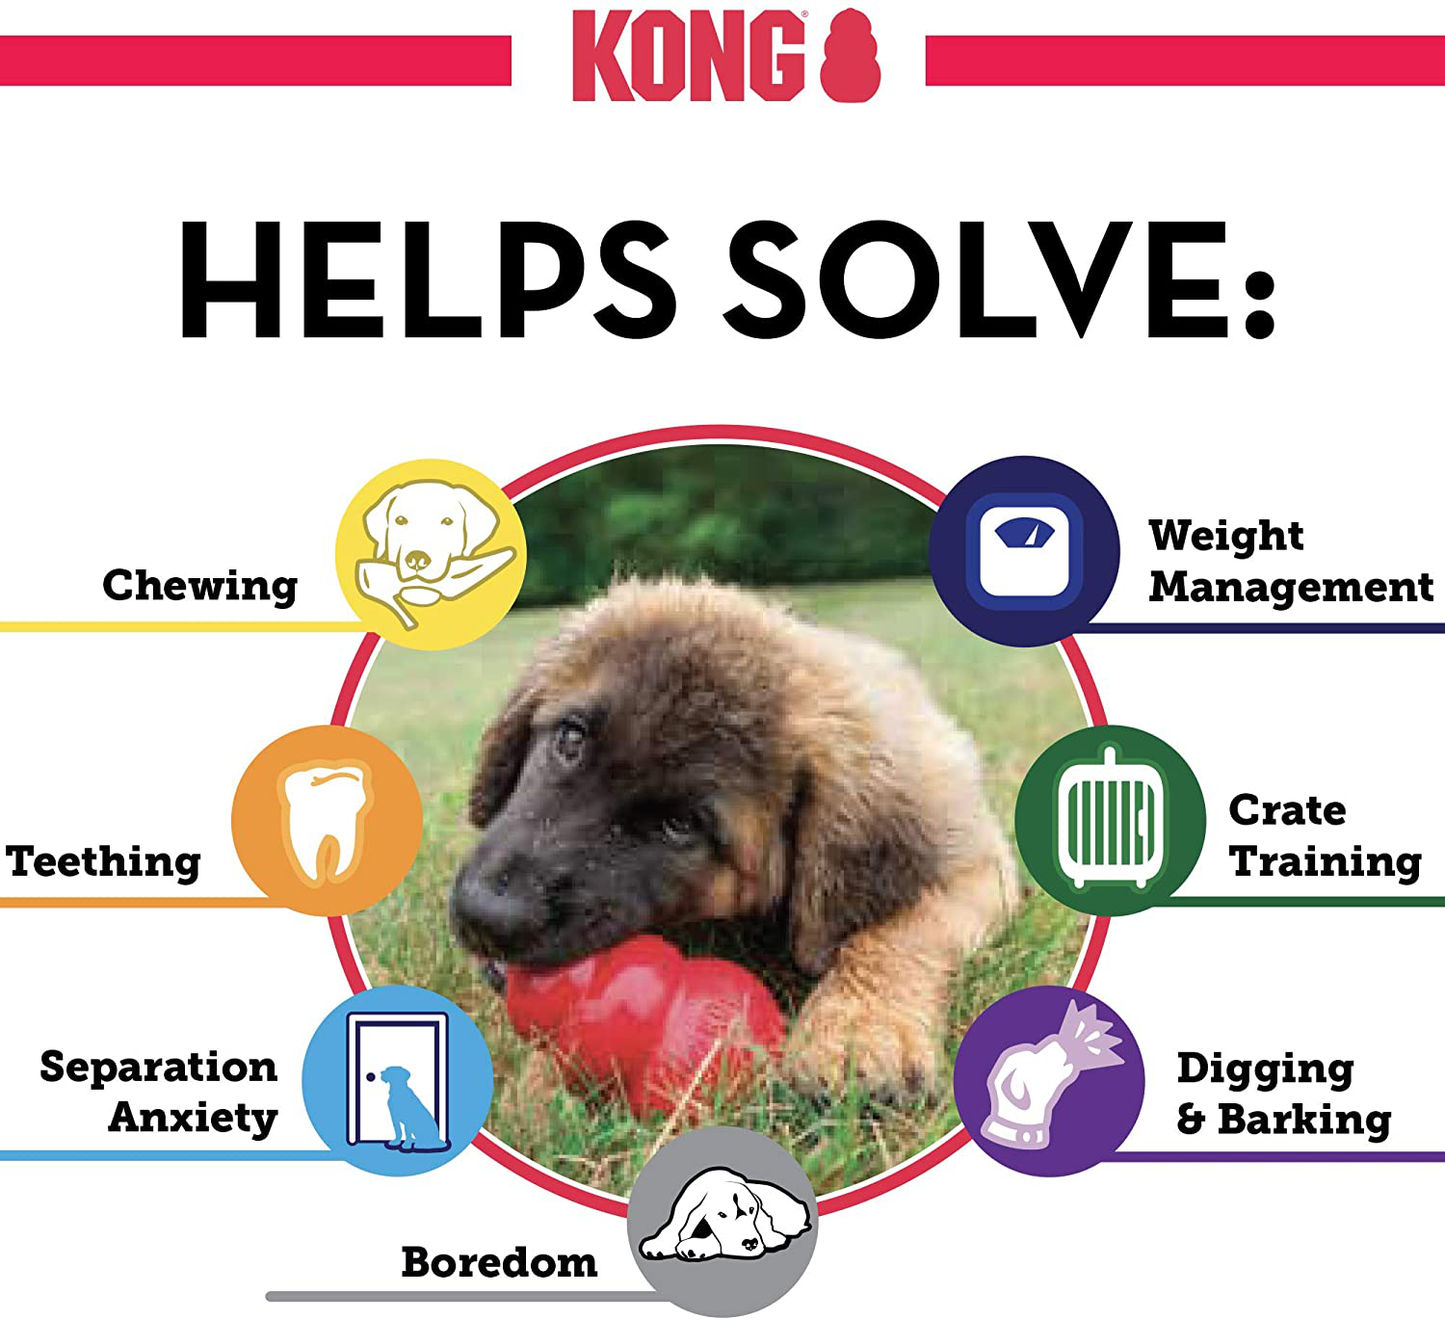 KONG - Extreme Dog Toy - Toughest Natural Rubber, Black - Fun to Chew, Chase and Fetch Animals & Pet Supplies > Pet Supplies > Dog Supplies > Dog Toys KONG   